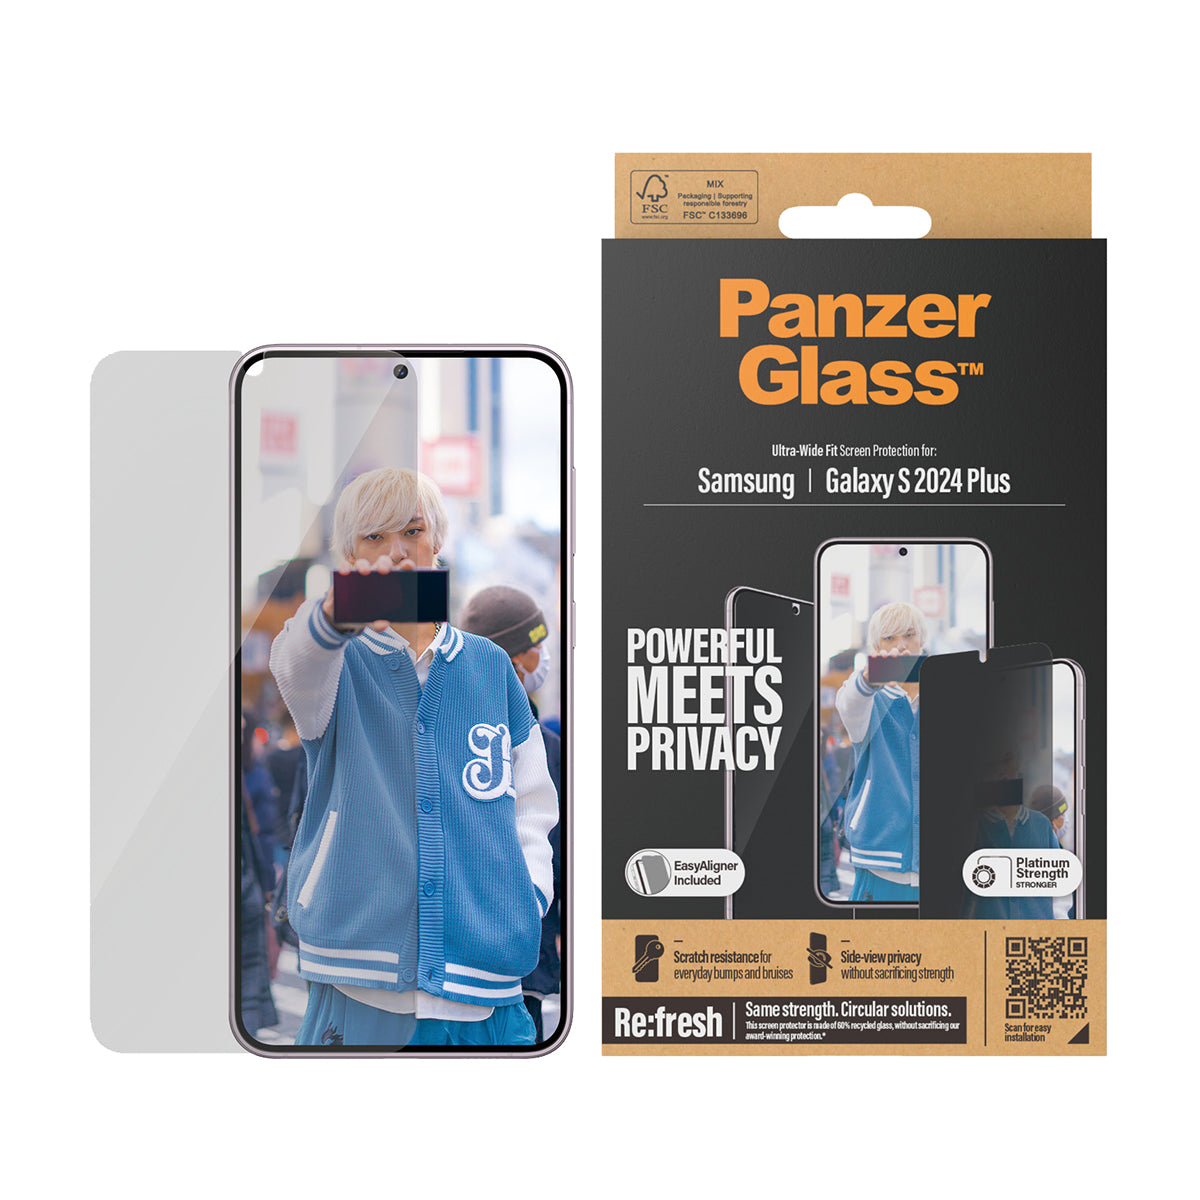 PanzerGlass Ultra-Wide Fit with EasyAligner Privacy Screen Protector for Samsung Galaxy S24+